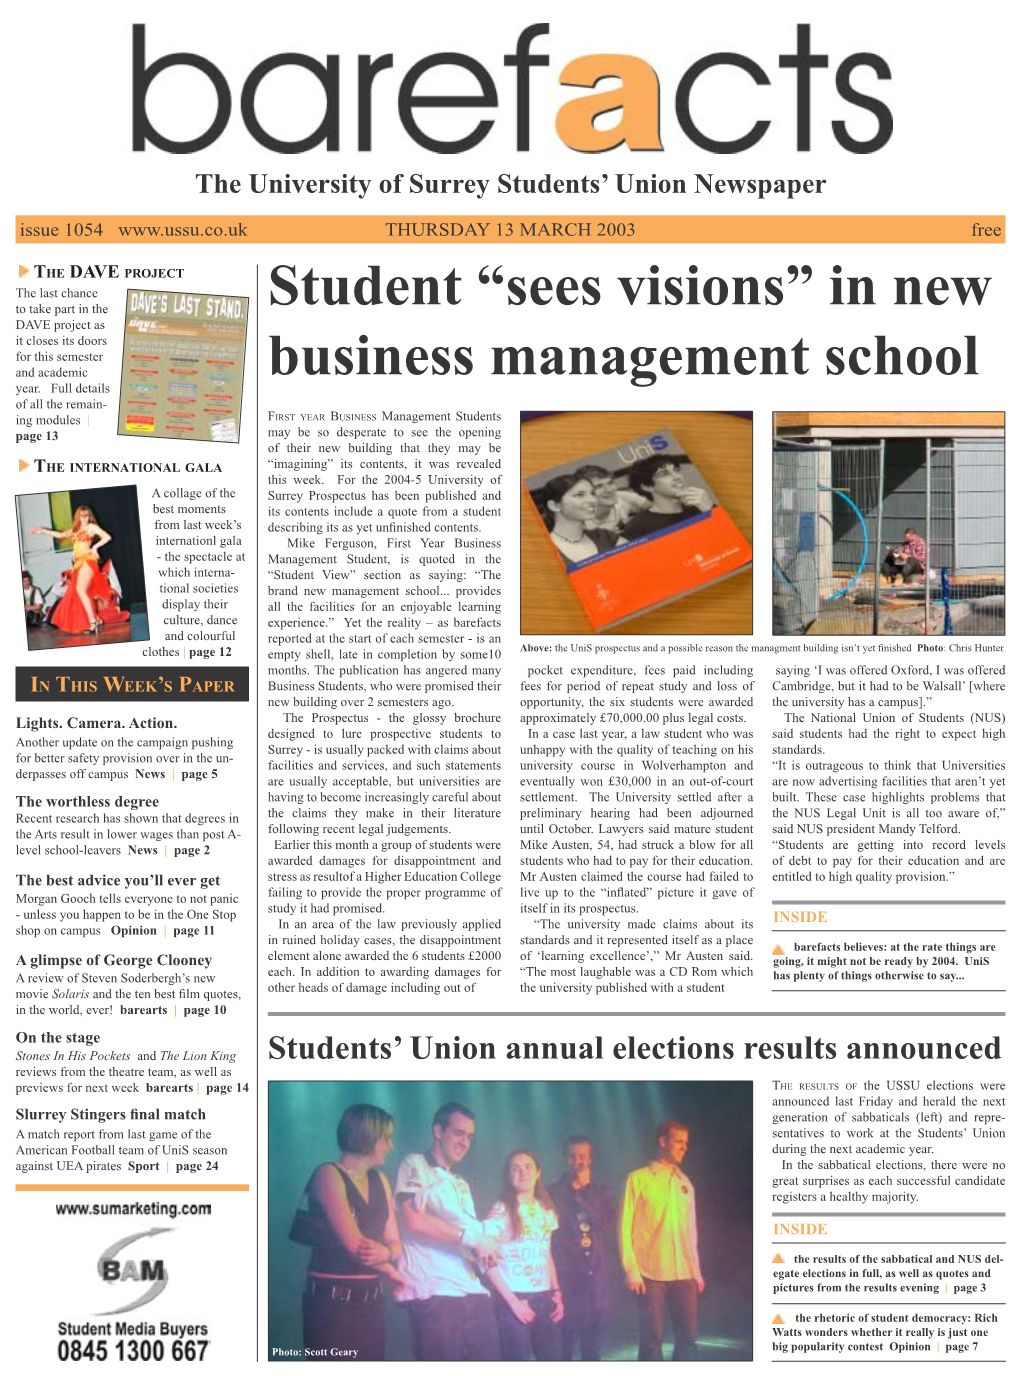 Student “Sees Visions” in New Business Management School